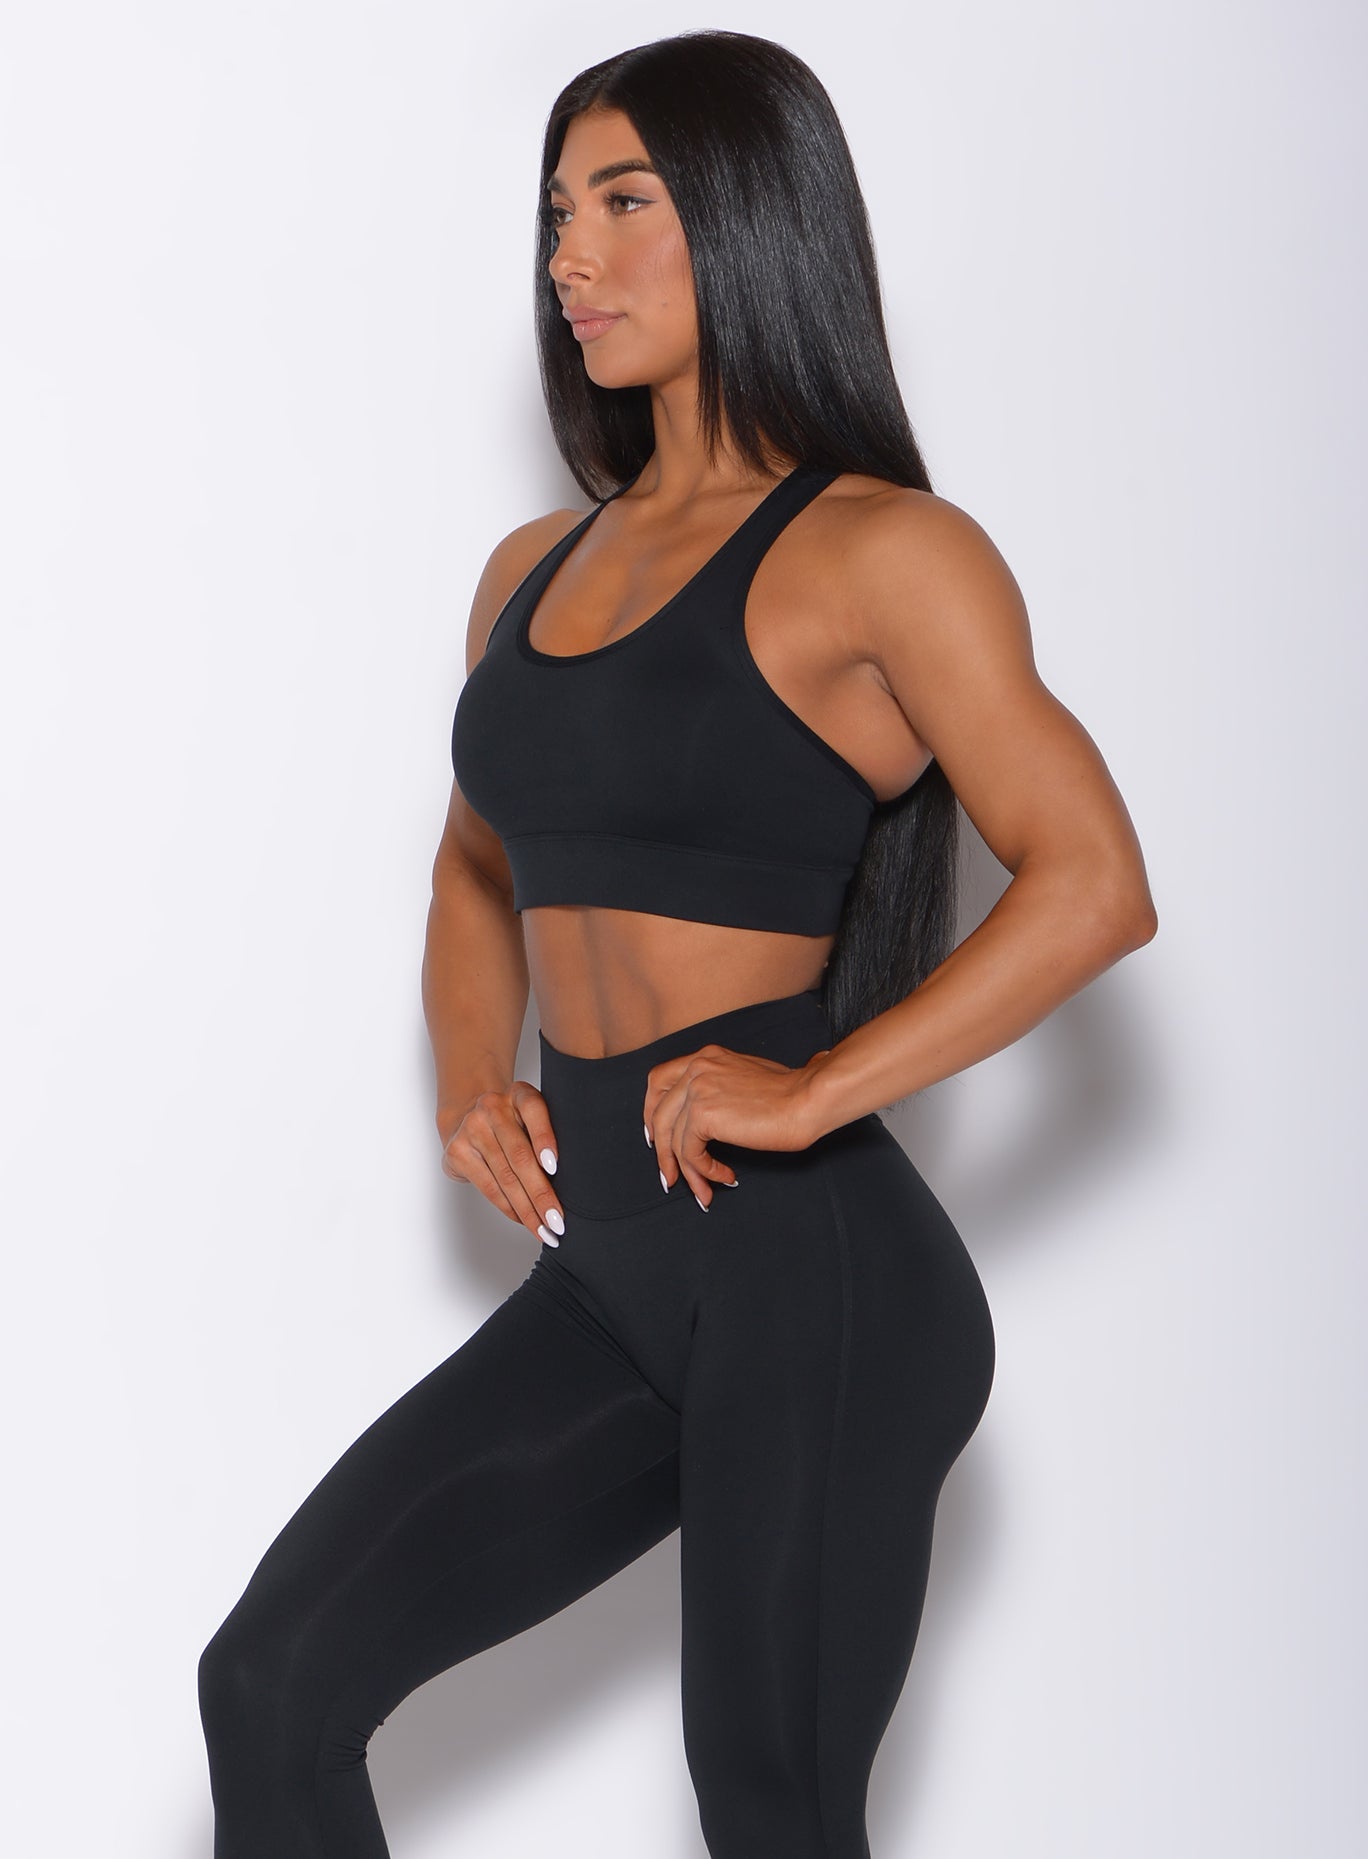 Left side profile view of a model wearing our black rival sports bra and a matching leggings